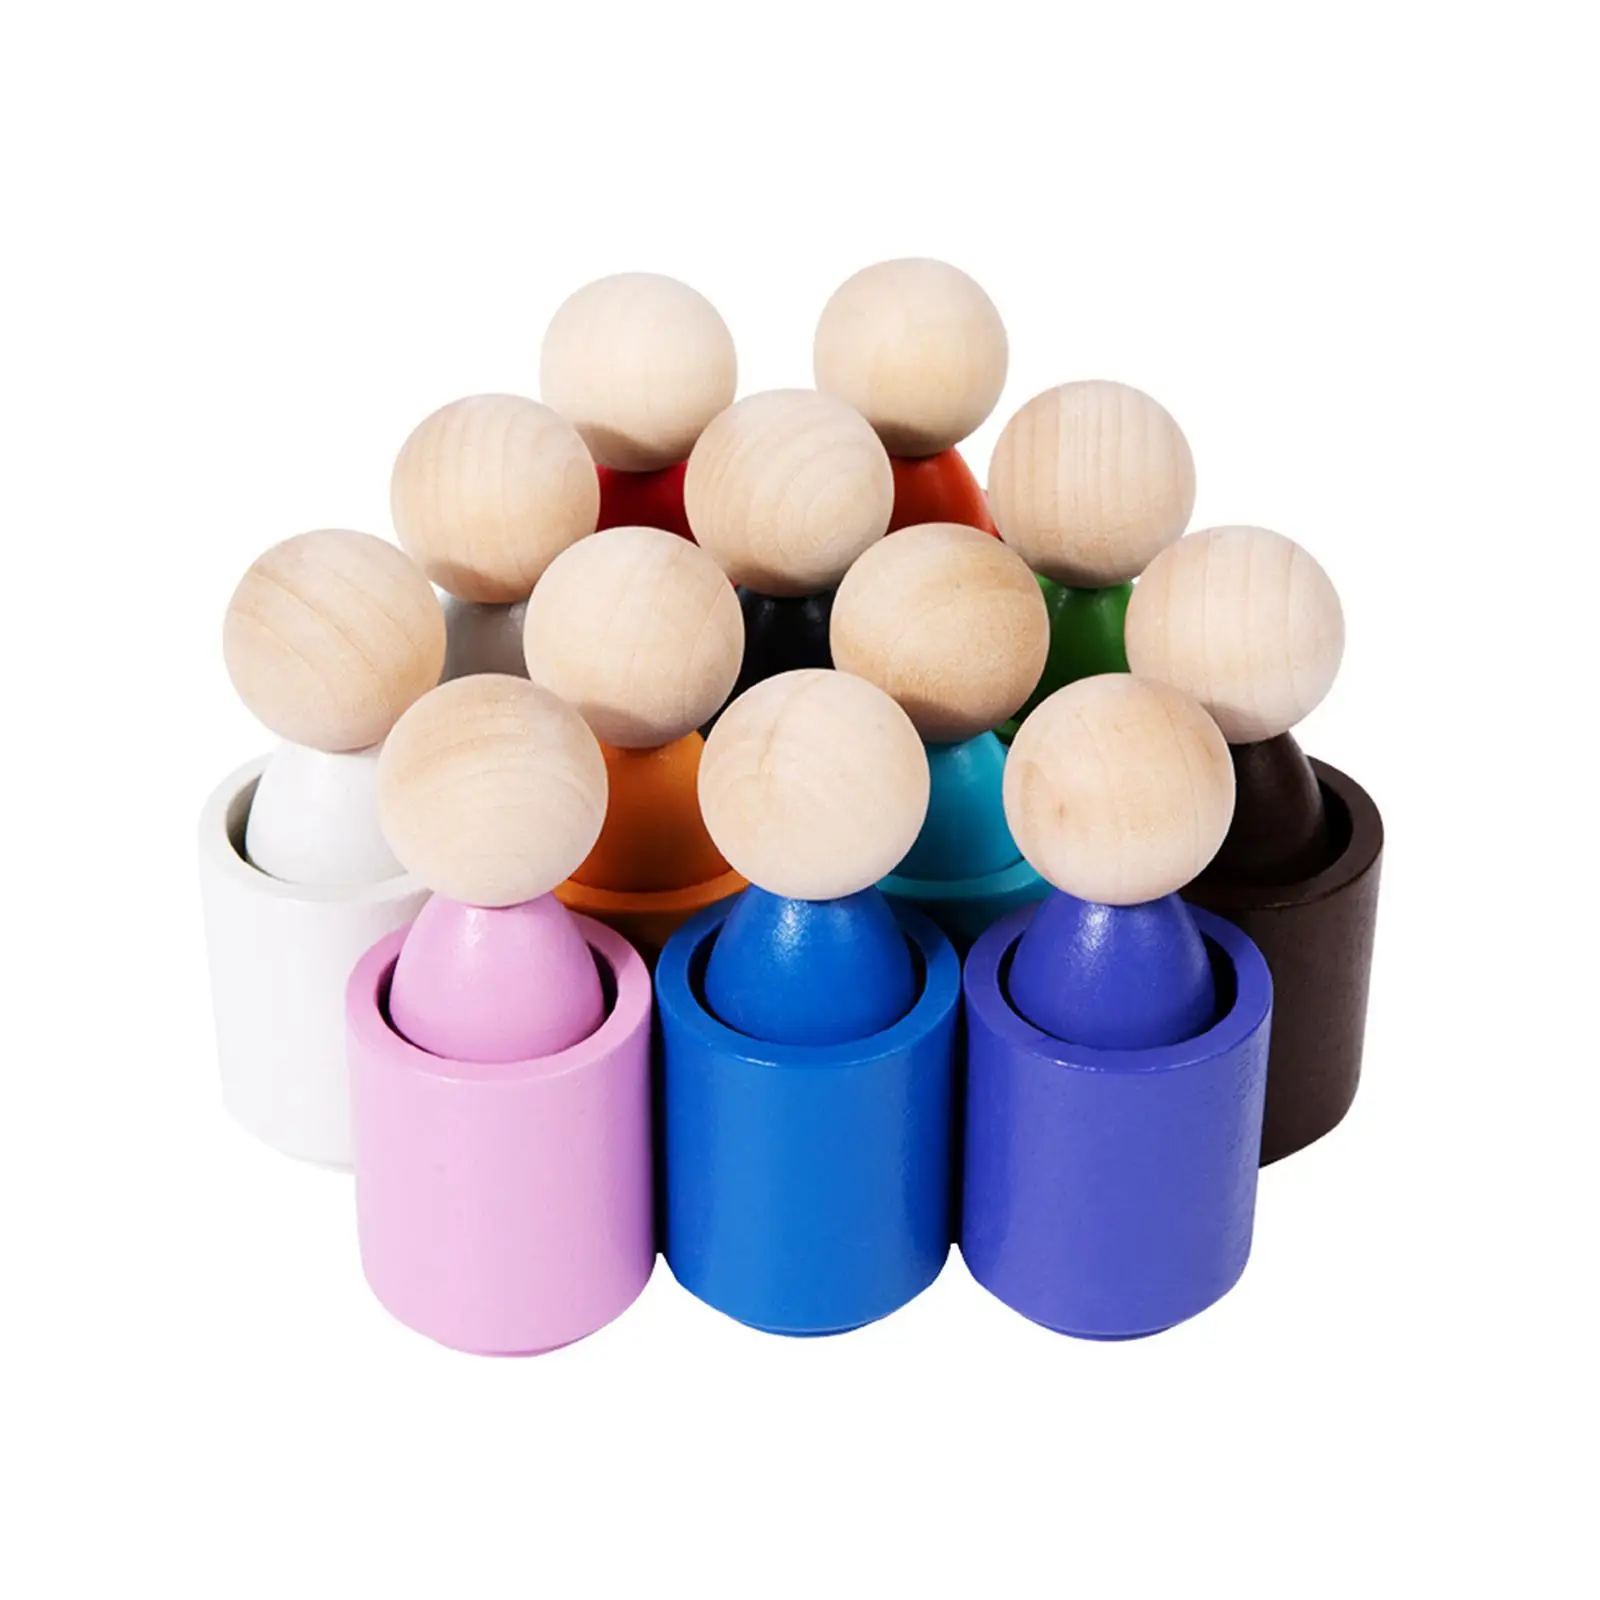 Balls in Cups Montessori Toy, Color Sorting Peg Dolls, Wooden Sorter Game, for Children